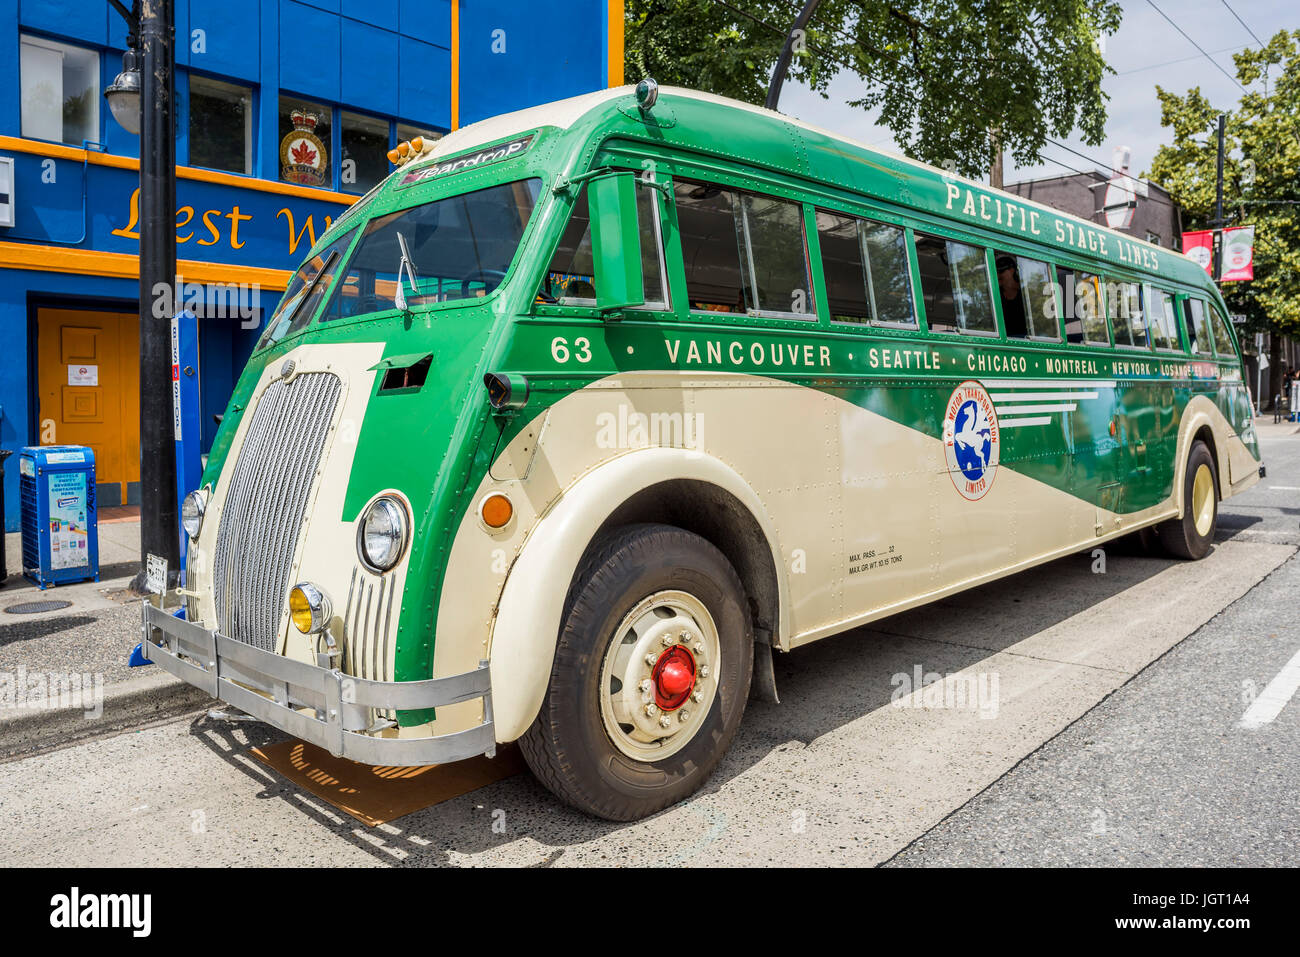 Vintage Pacific Stage Lines Hayes Tear Drop Bus, Car Free Day, Commercial Drive, Vancouver, British Columbia, Canada. Stock Photo